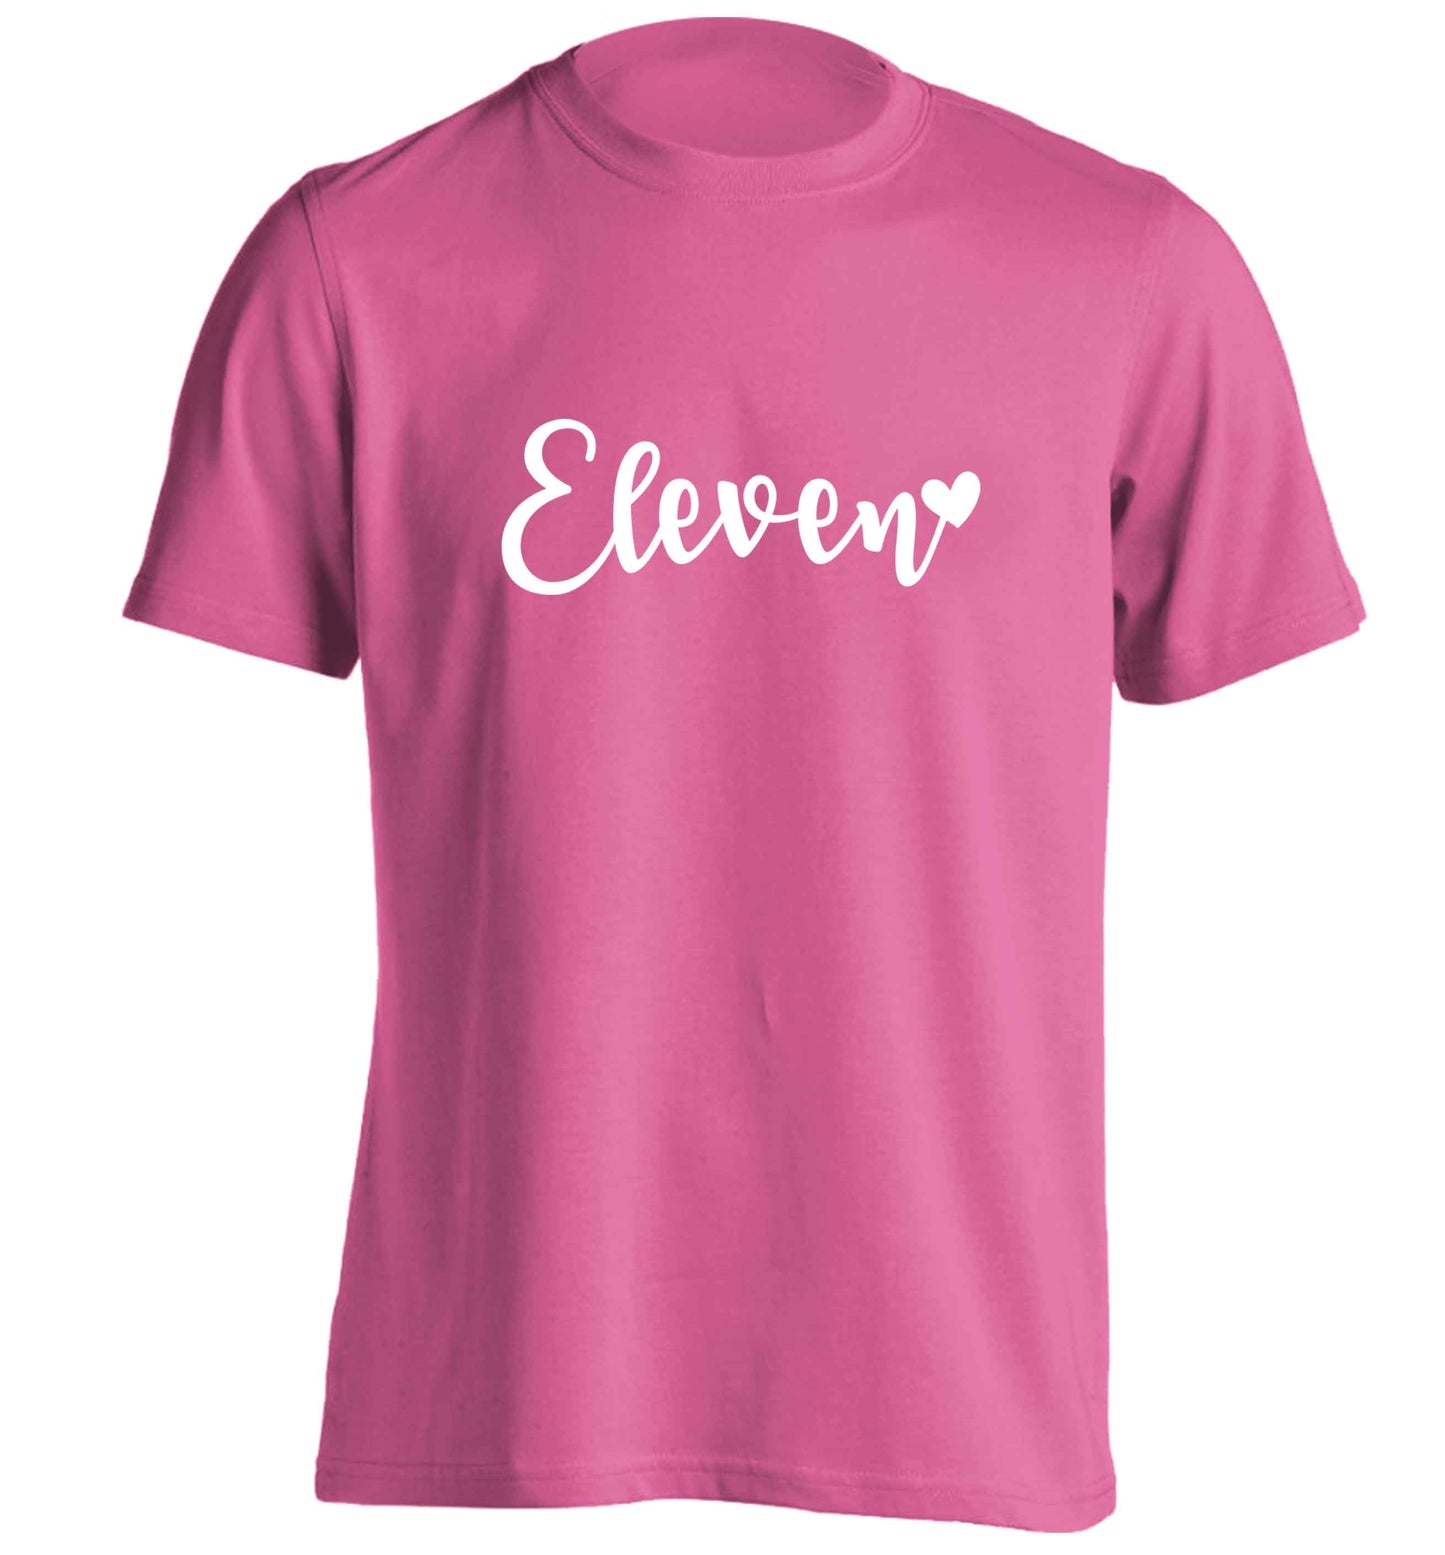 Eleven and heart! adults unisex pink Tshirt 2XL